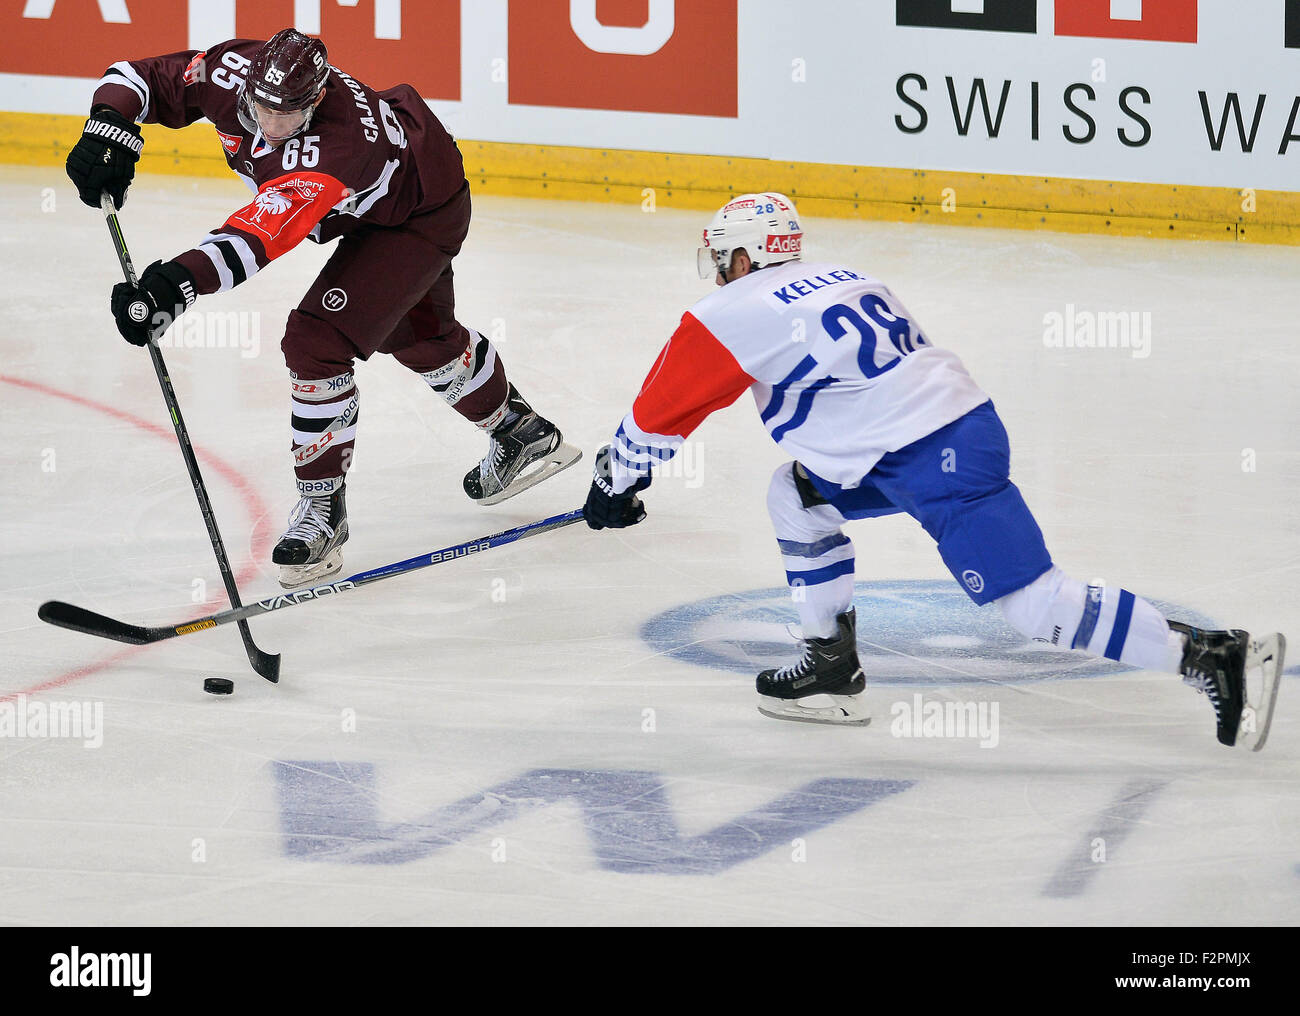 Prague, Czech Republic. 22nd Sep, 2015. From right: Ryan Keller of Zurich and Michal Cajkovsky of Sparta during the ice hockey Champions League, 1st round play off match HC Sparta Praha vs ZSC Zurich Lions in Prague, Czech Republic, September 22, 2015. © Katerina Sulova/CTK Photo/Alamy Live News Stock Photo